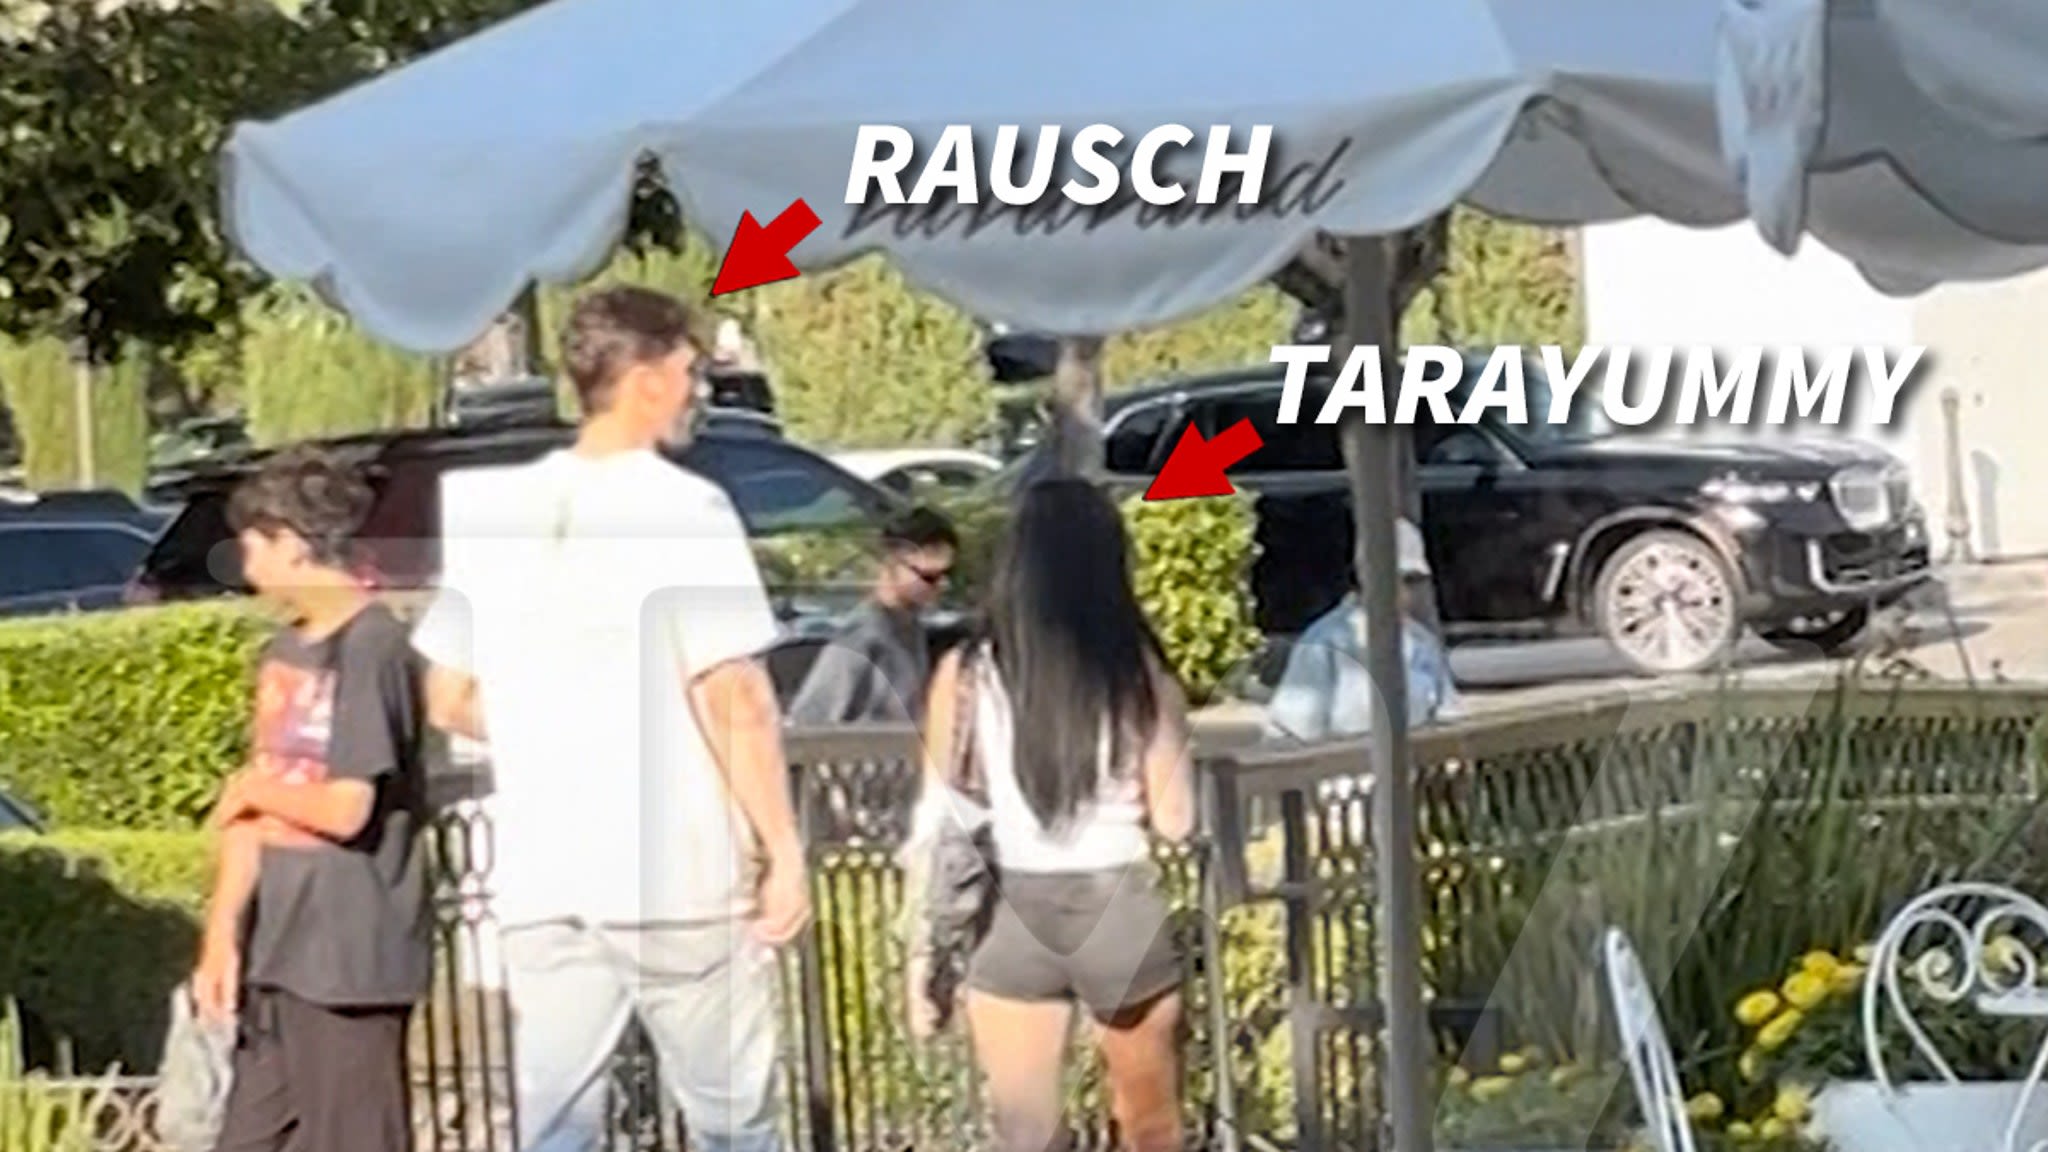 'Love Island' Star Rob Rausch Hanging Out with YouTuber Tarayummy